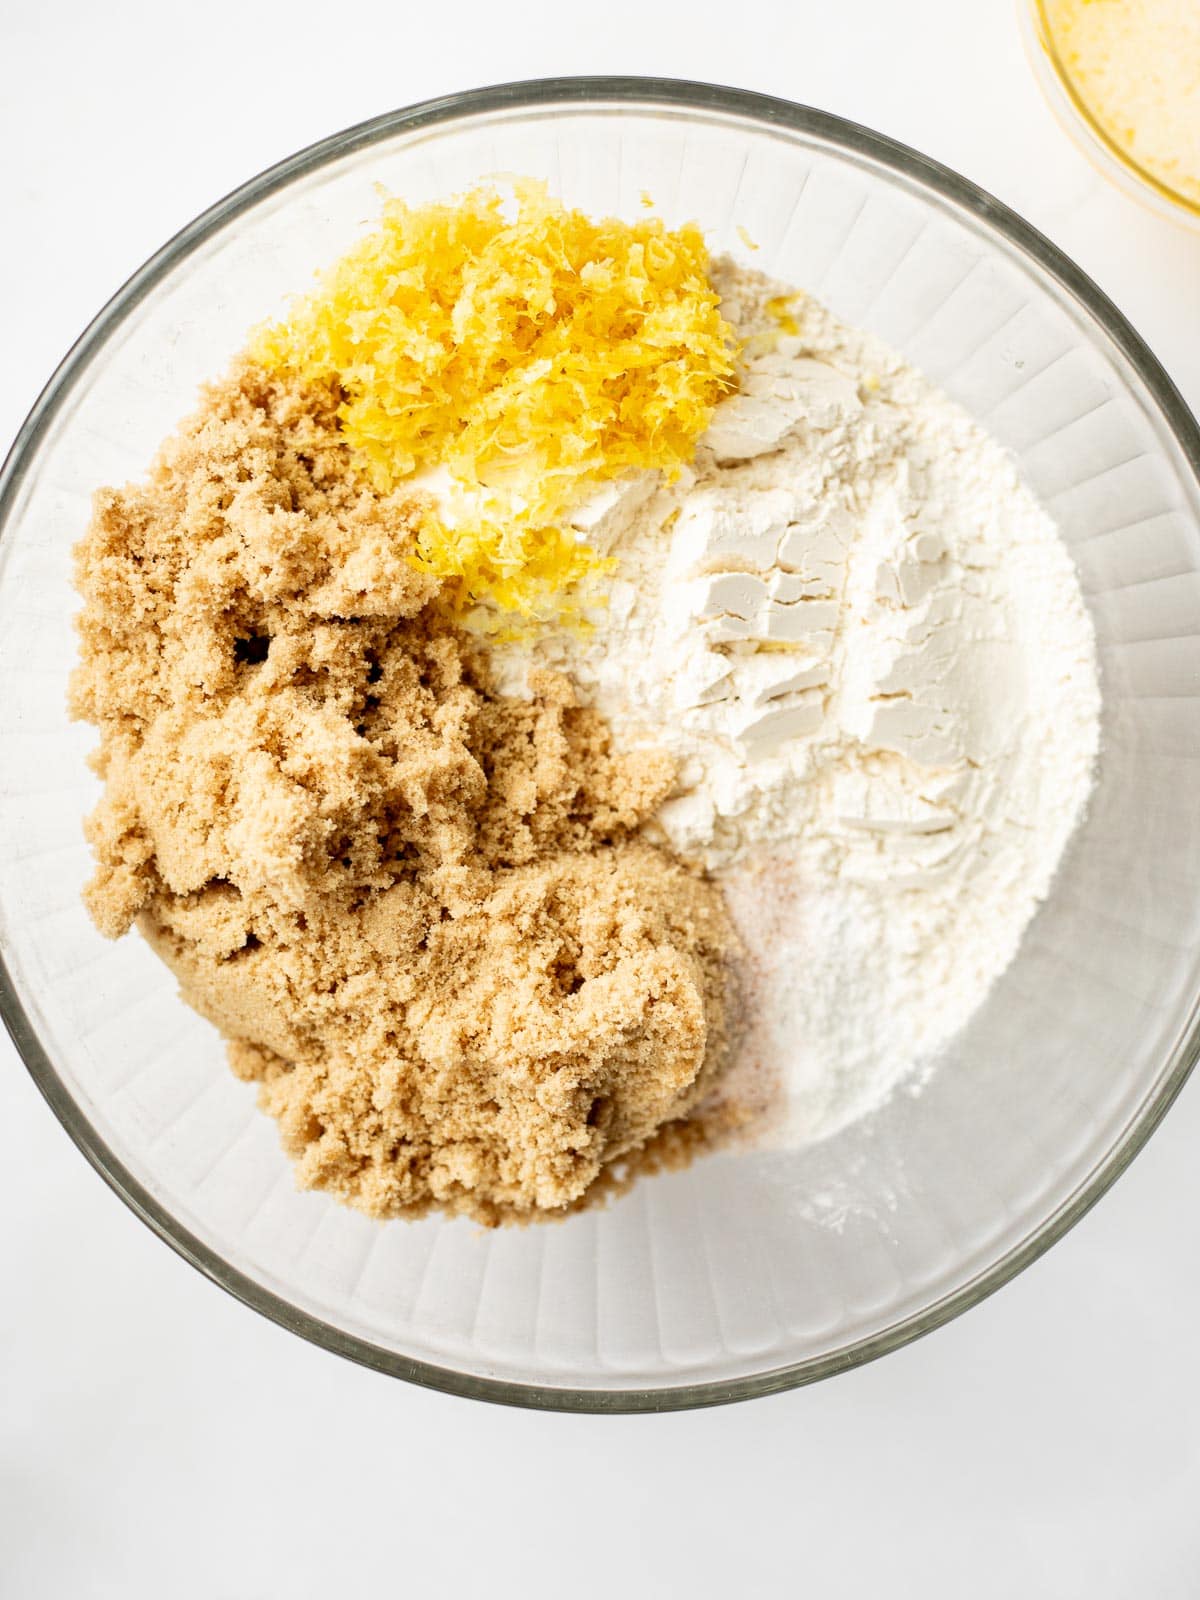 a glass bowl filled with flour, brown sugar, and lemon zest.